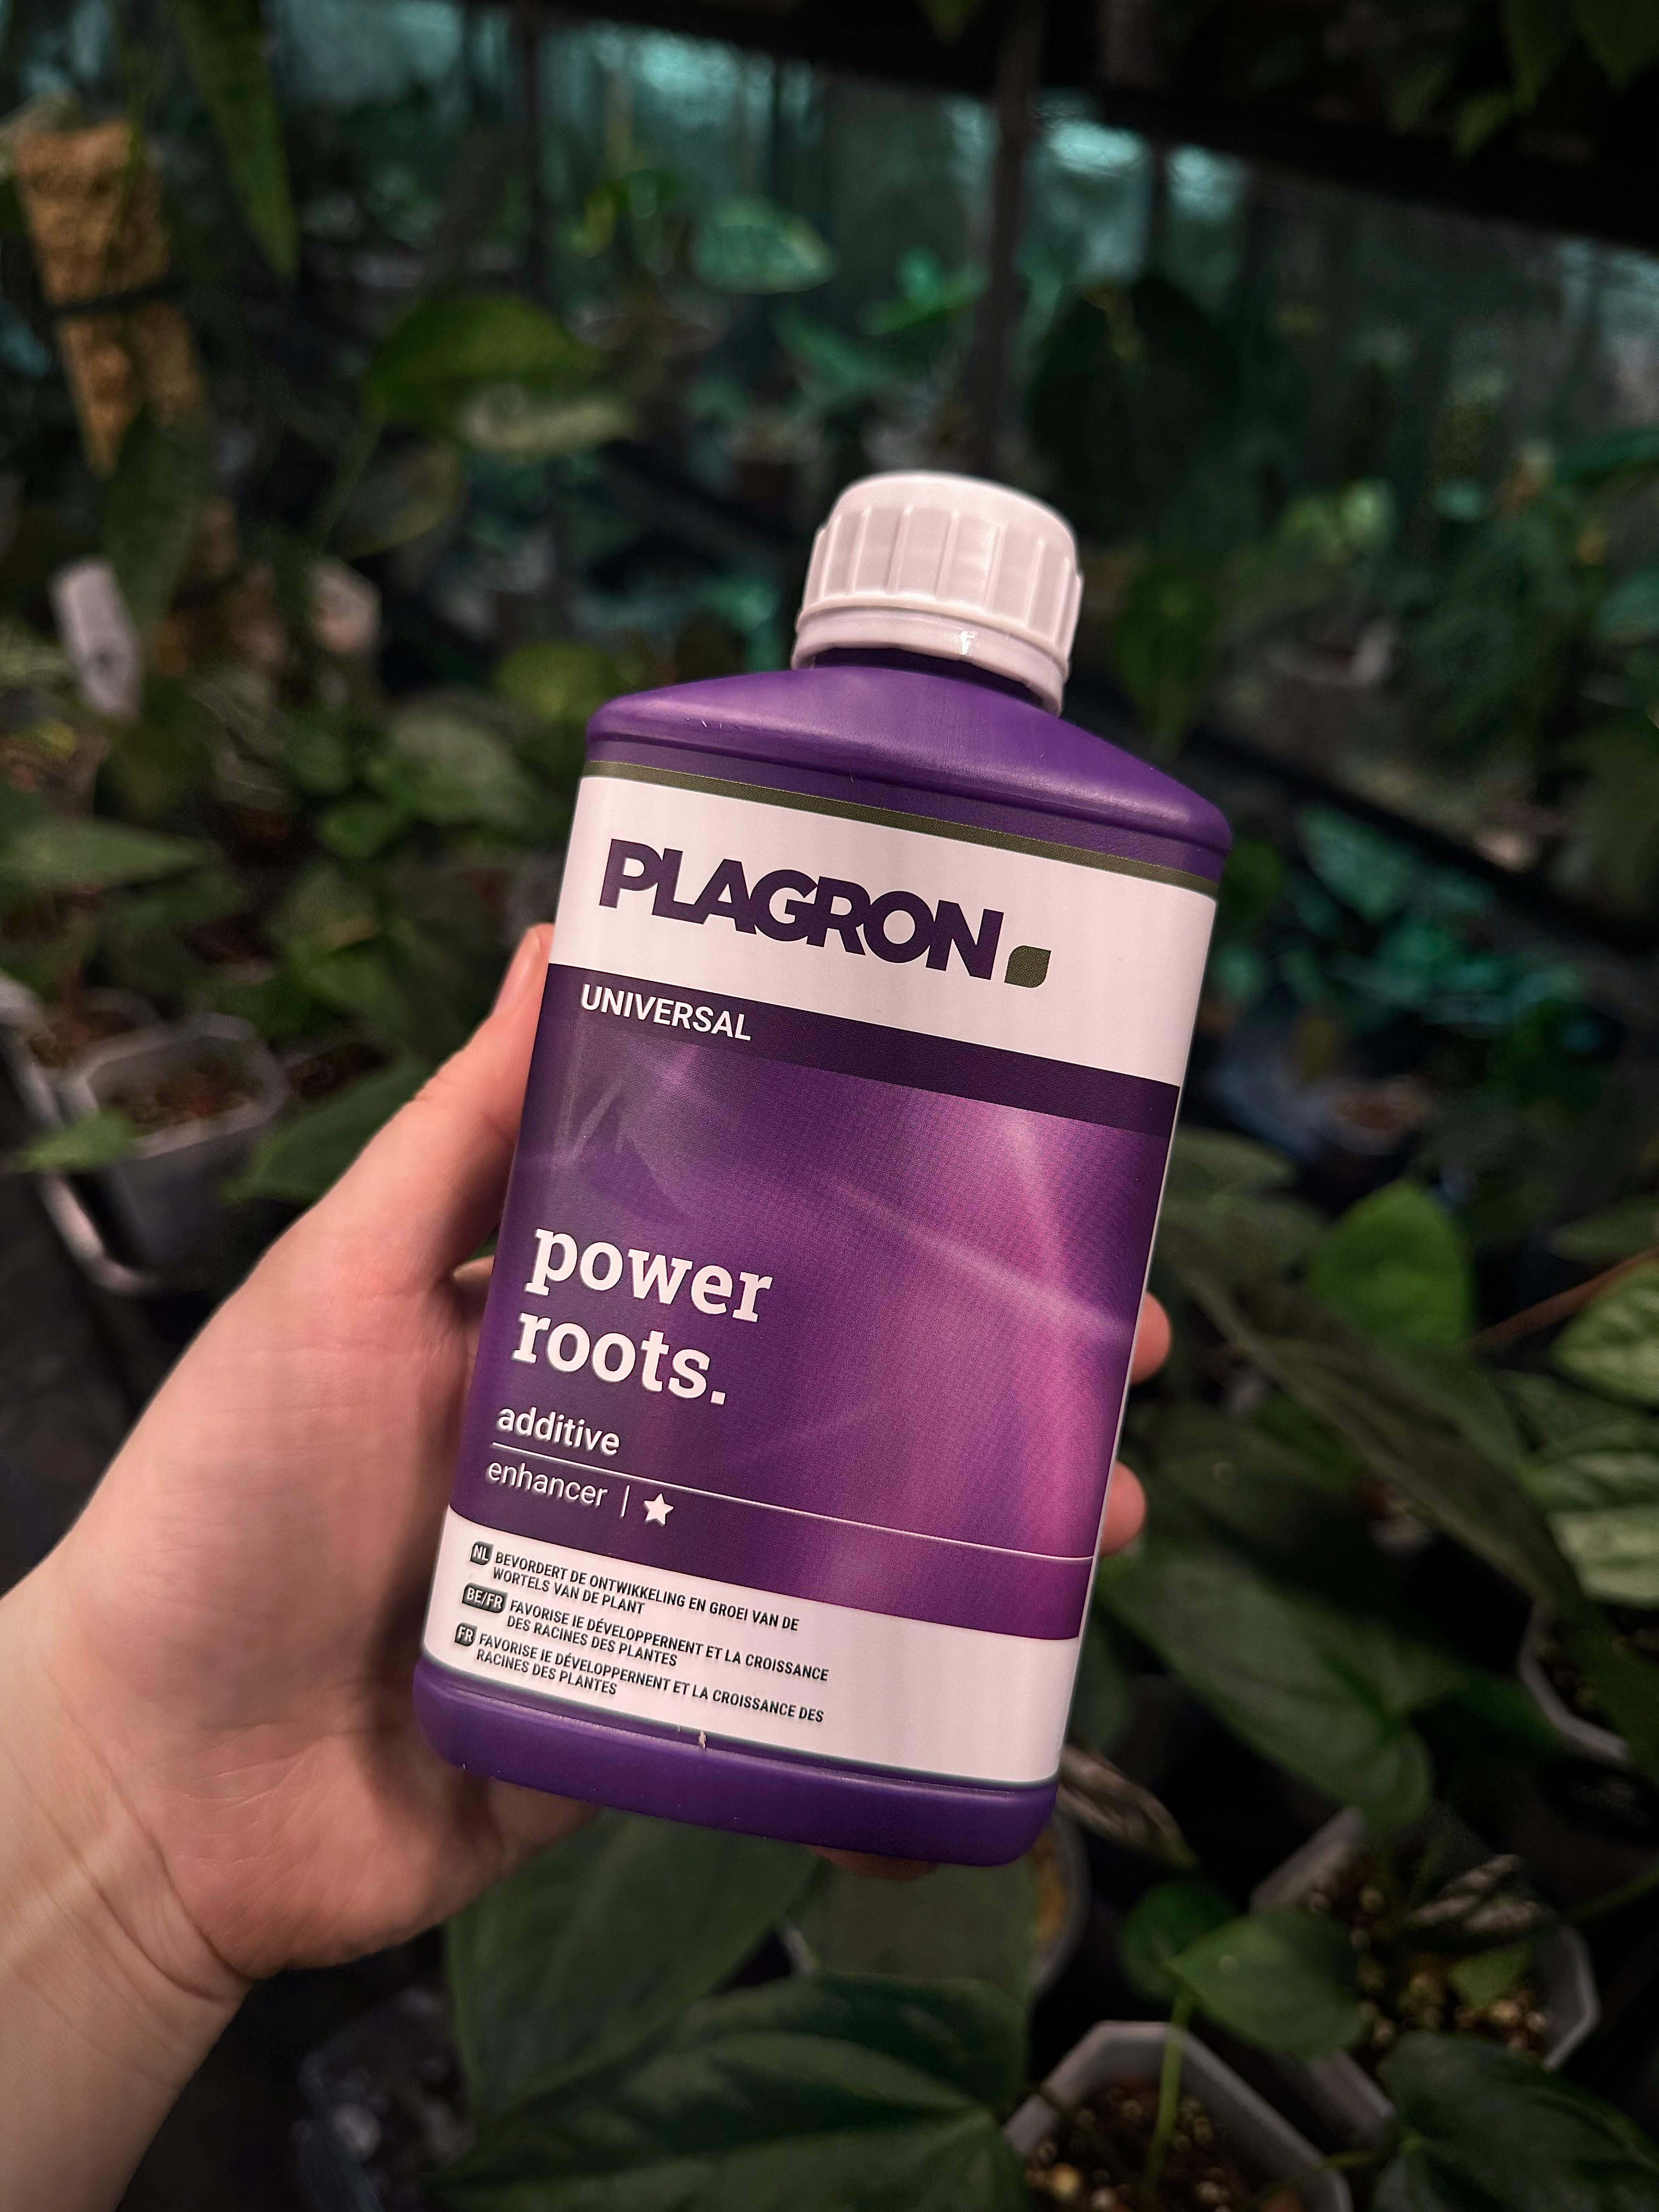 Plagron Power Roots